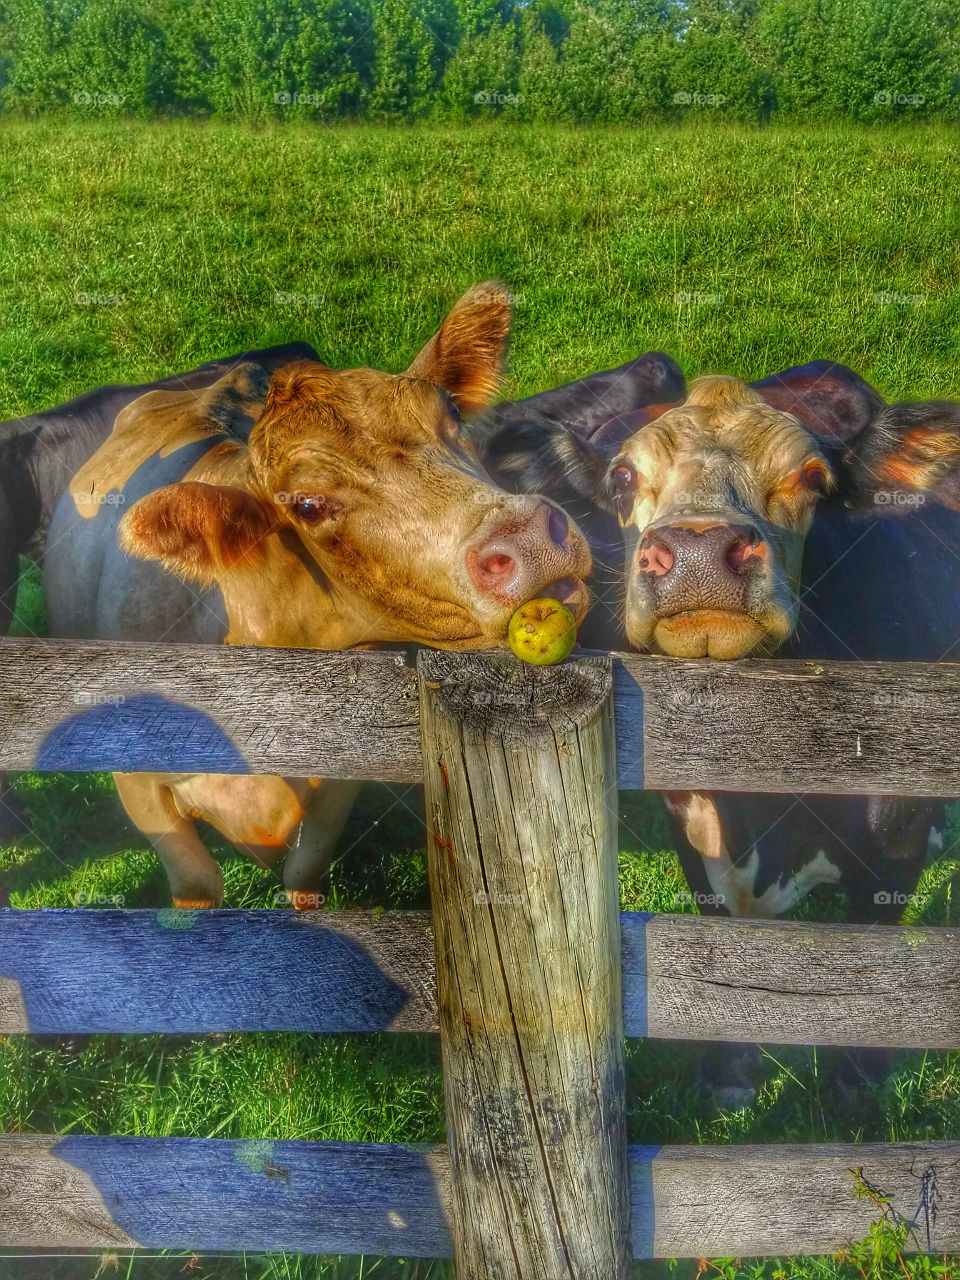 Cows eating green apple